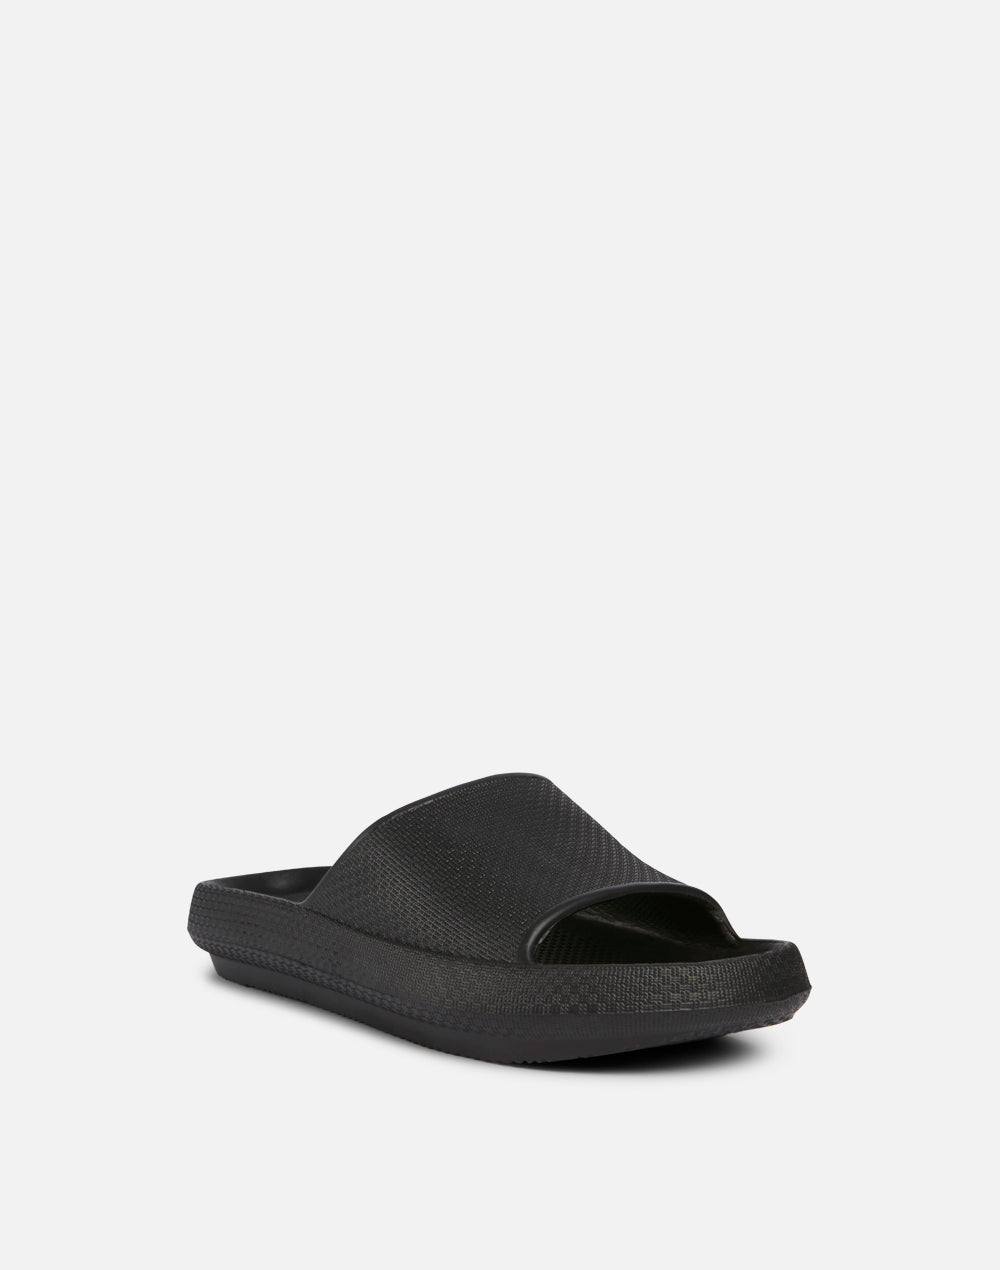 ROUNDED SANDAL WITH WEDGE